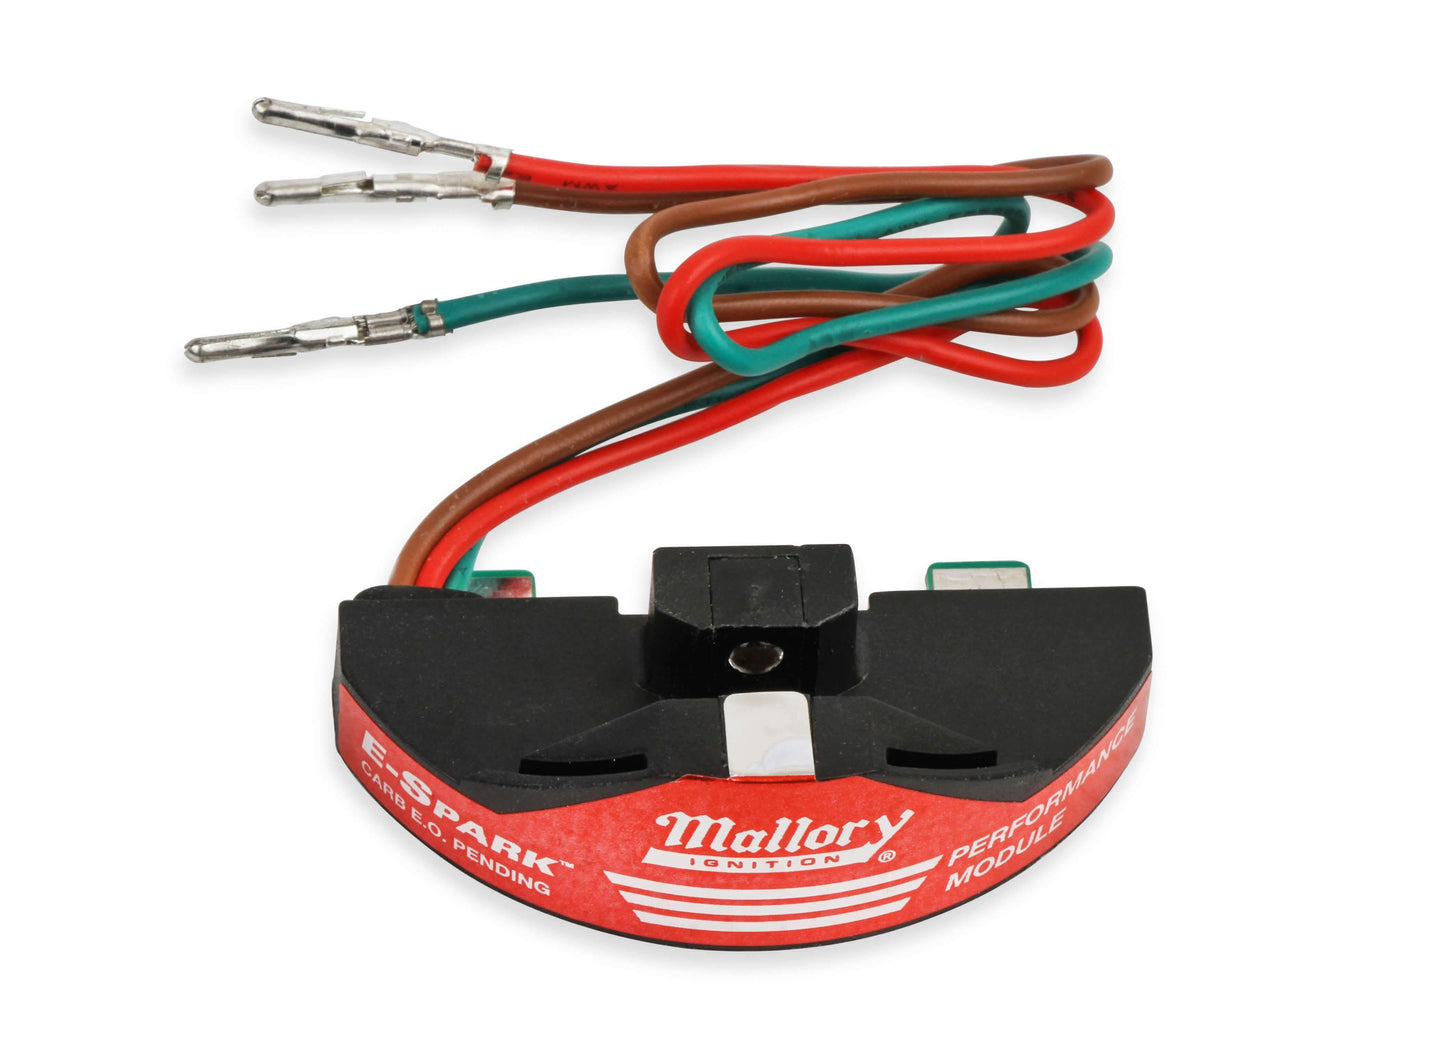 Mallory Distributor Ignition Module 6100M; E-Spark 12 Volts for Harley Davidson